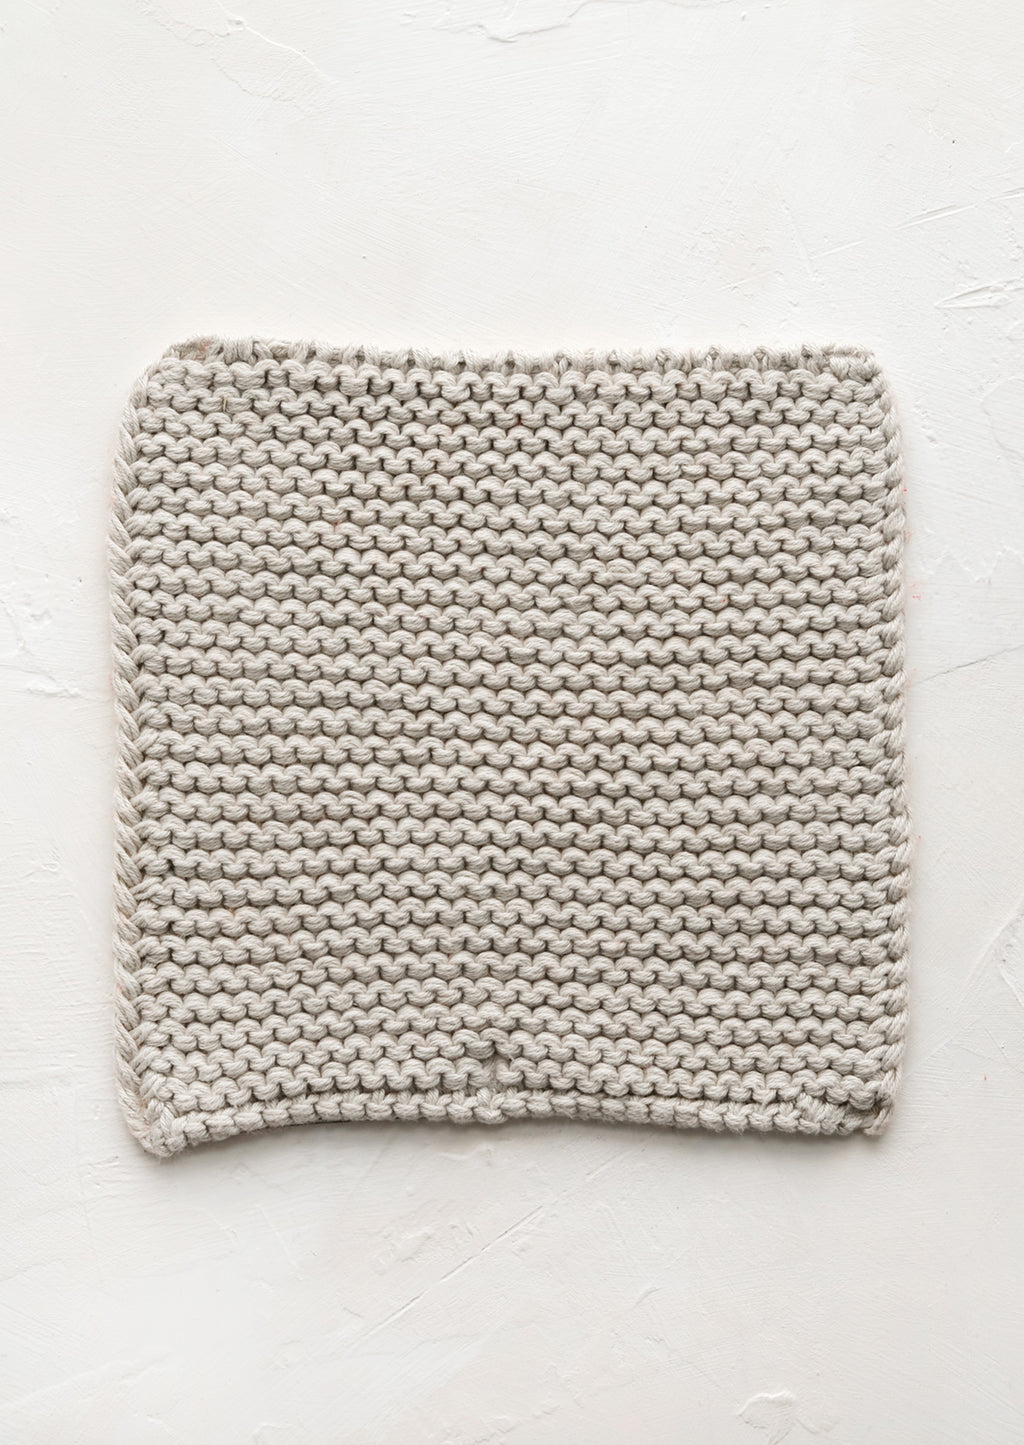 Oyster: A square, chunky knit cotton potholder in oyster grey.